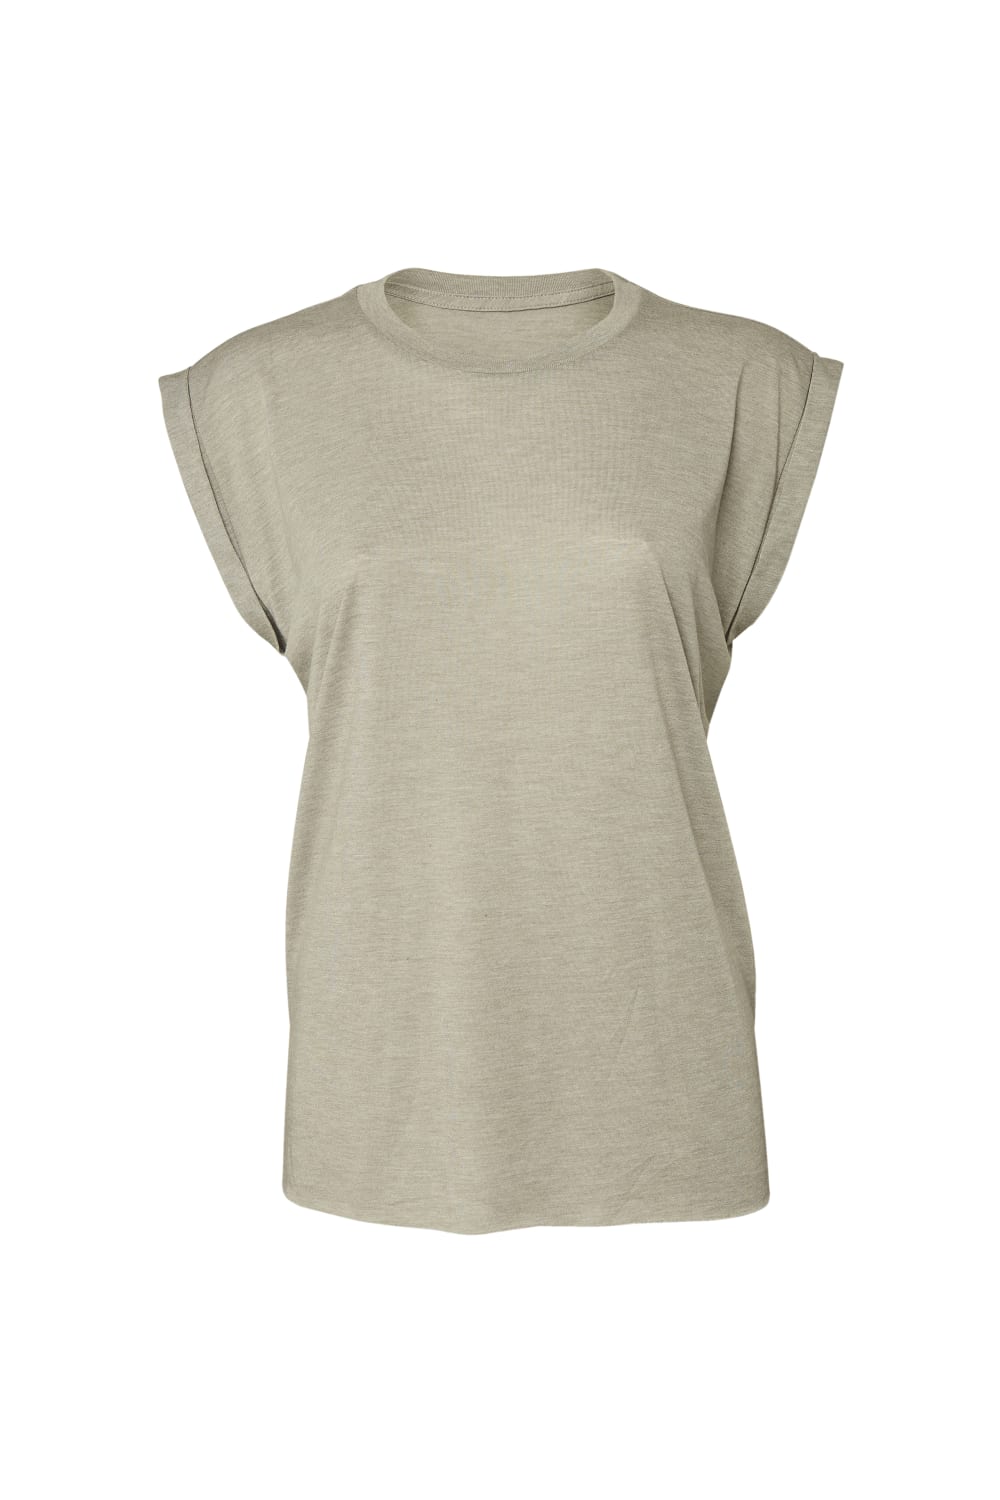 Bella + Canvas Womens/Ladies Flowy Rolled Cuff Muscle T-Shirt (Heather Stone)